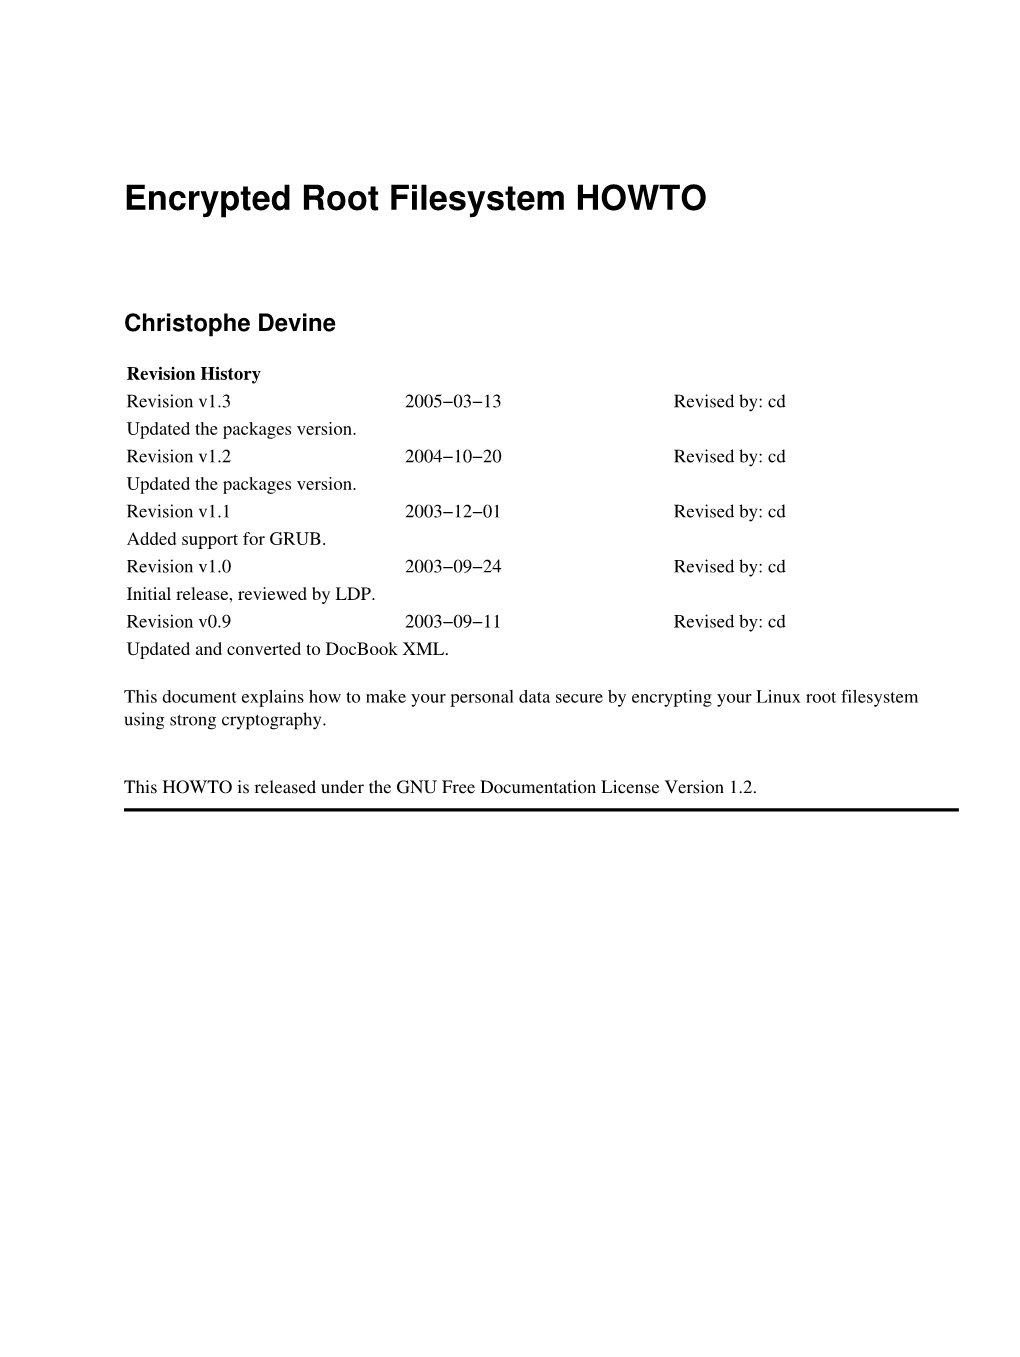 Encrypted Root Filesystem HOWTO